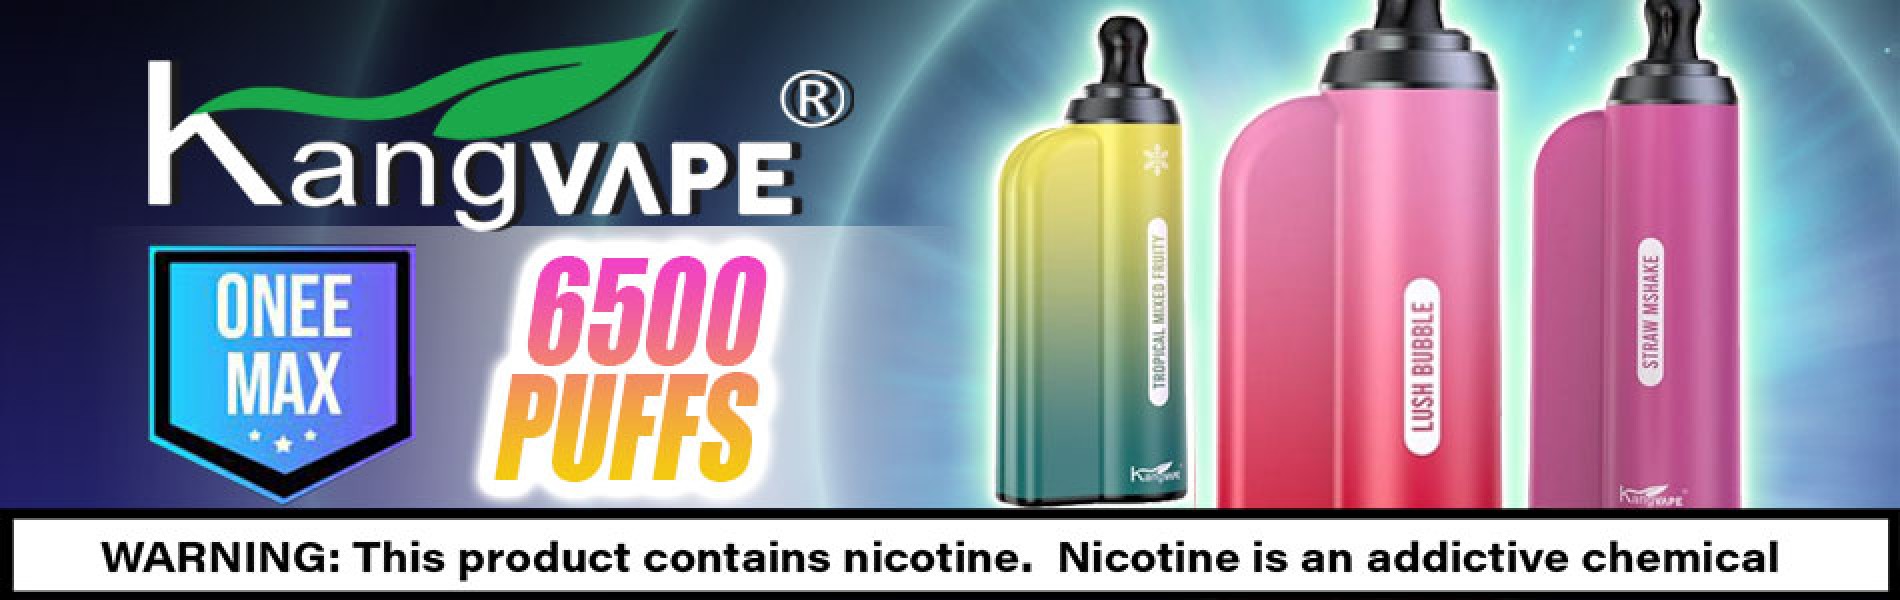 Kangvape Onee Max - Now Featuring 6500 Puffs per Device